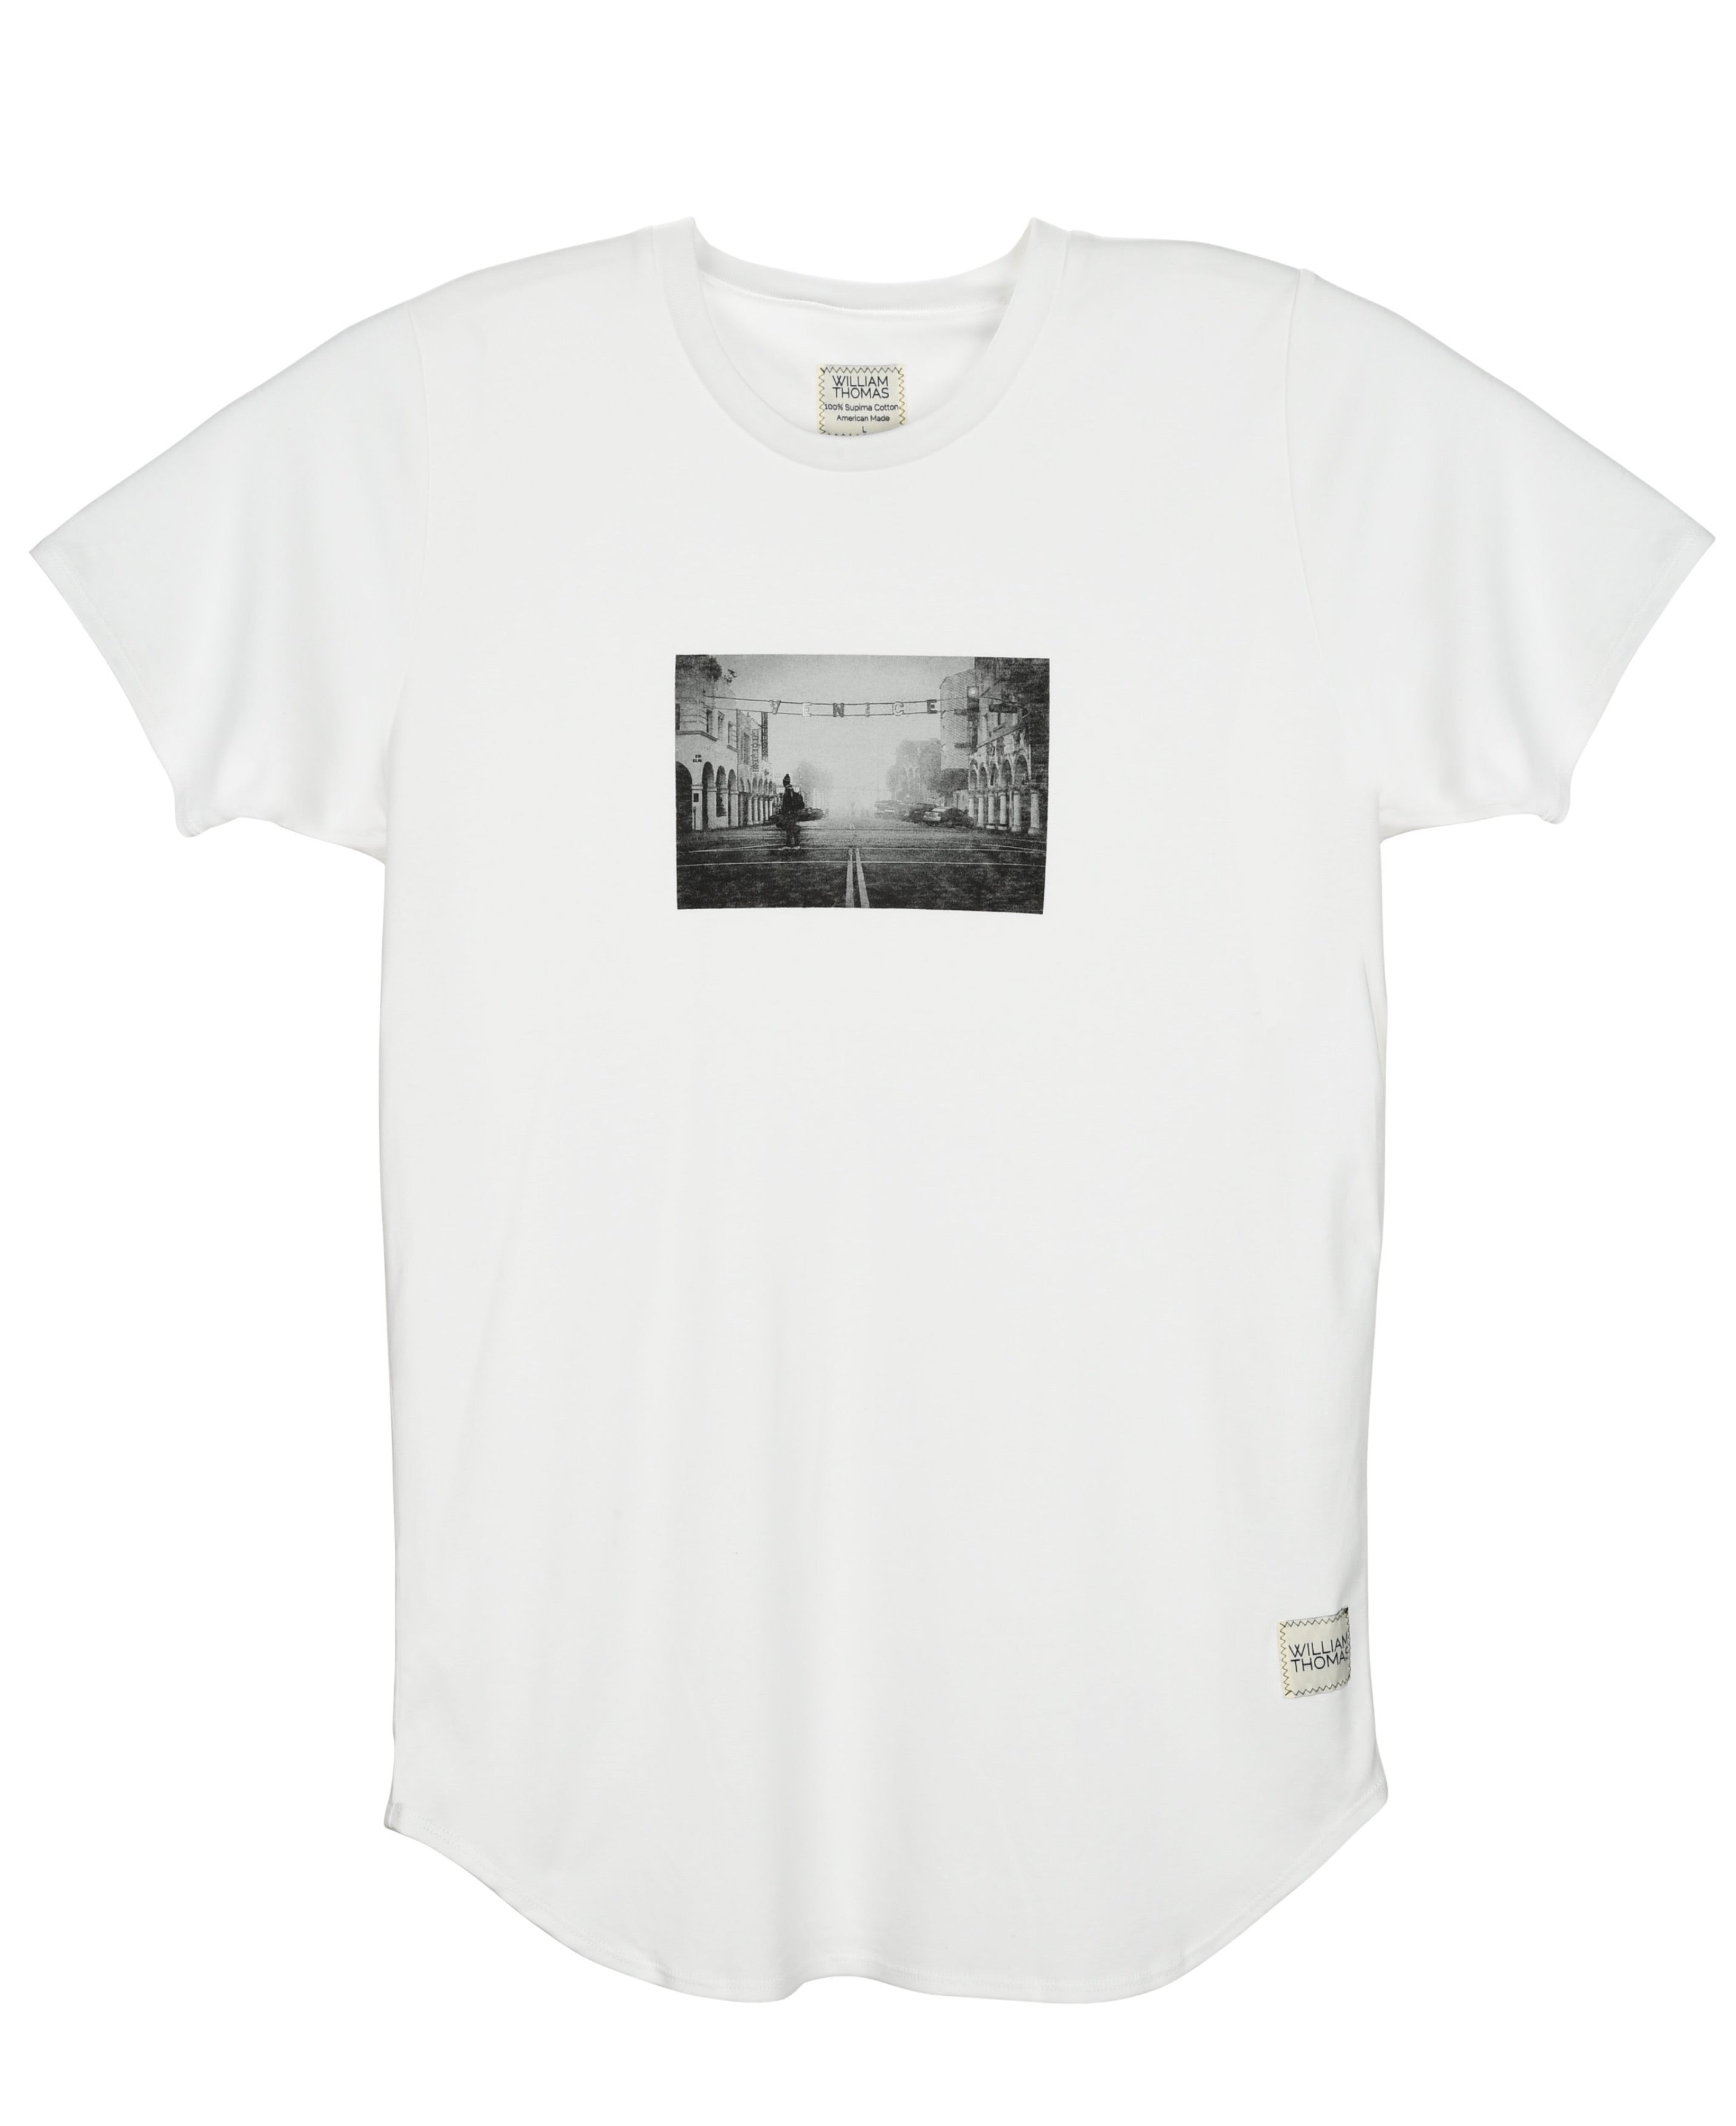 Sold Out) Supima® Venice Beach, White Series (limited I O W L Ghost Tee, S I L A H City M T A – M